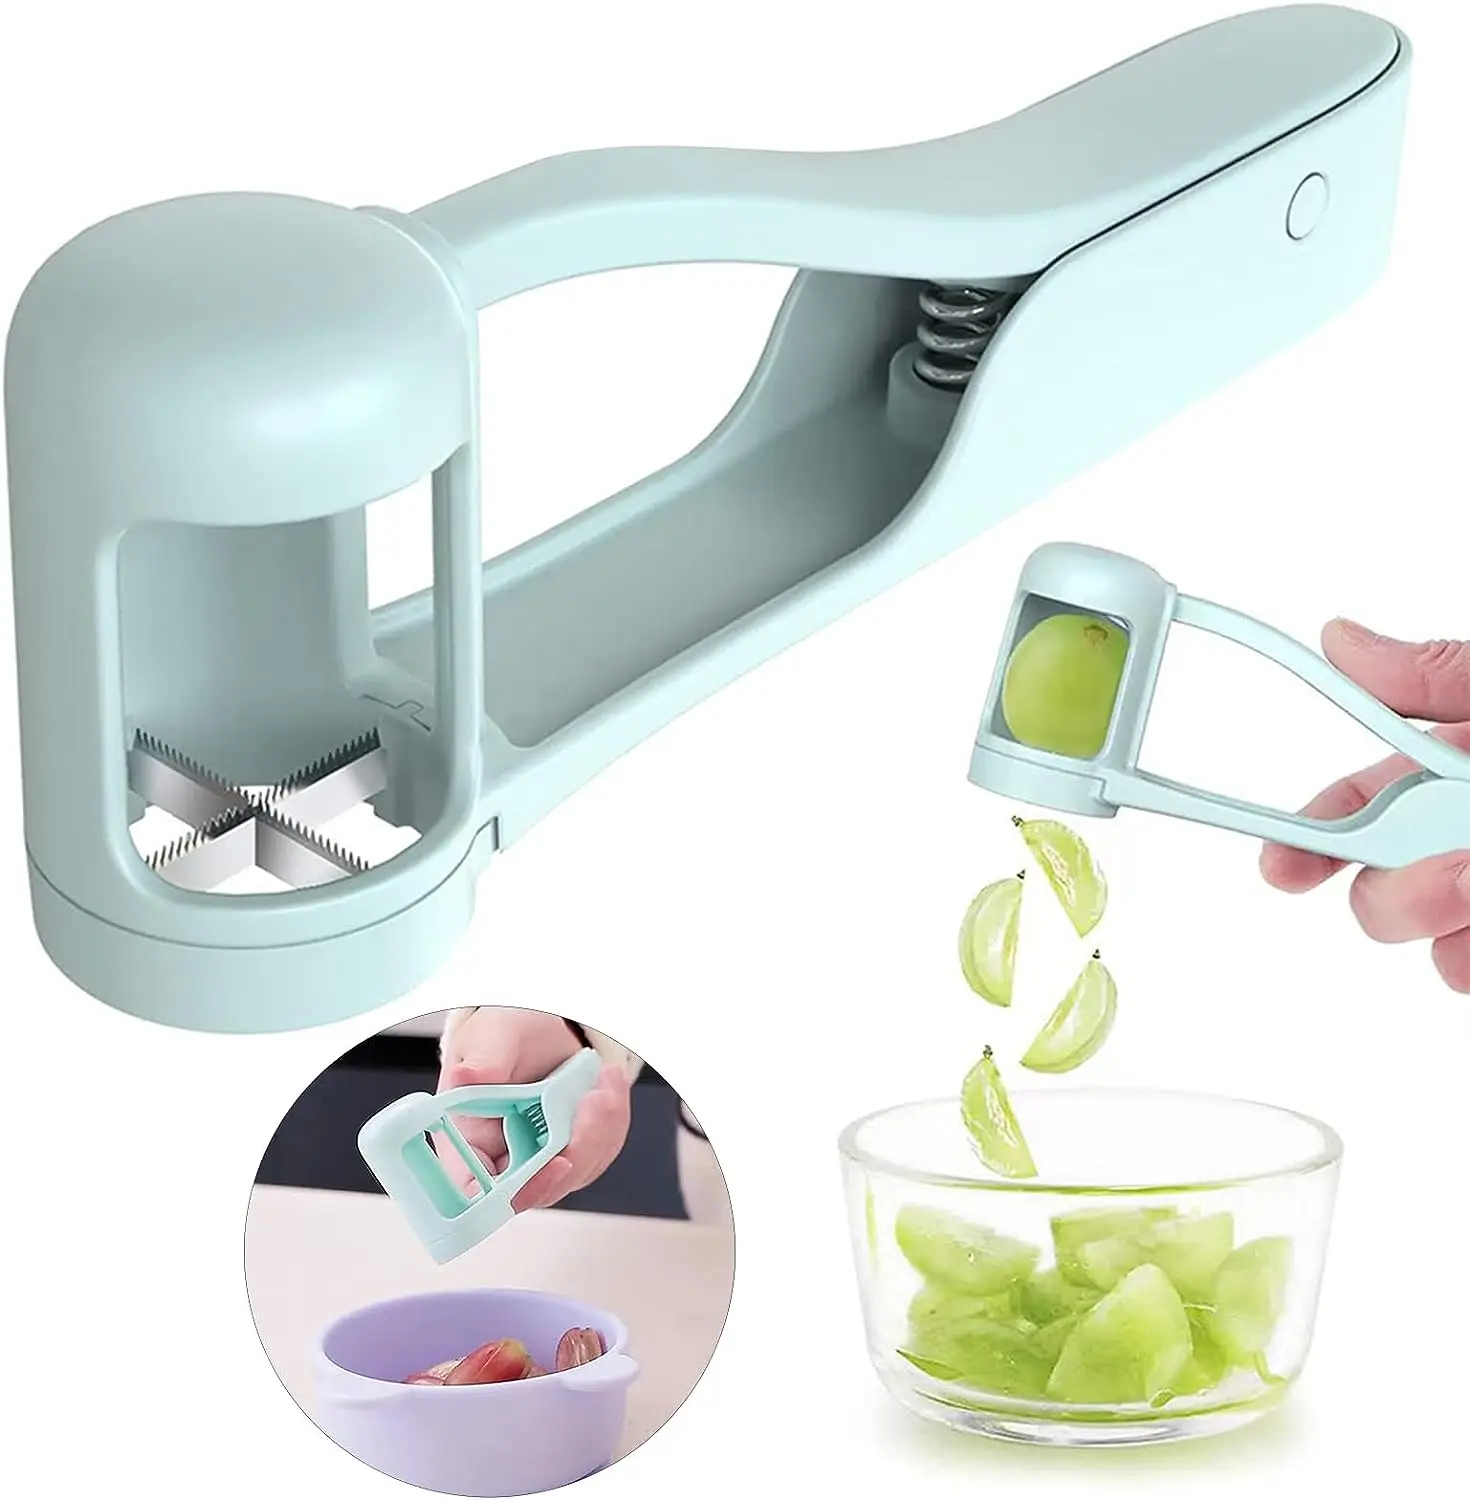 

Grape Cutter Grapes Cherry Tomato Strawberry Cutter Quarter Slicer Vegetable Fruit Salad Cake Kitchen Tool for Toddlers Baby